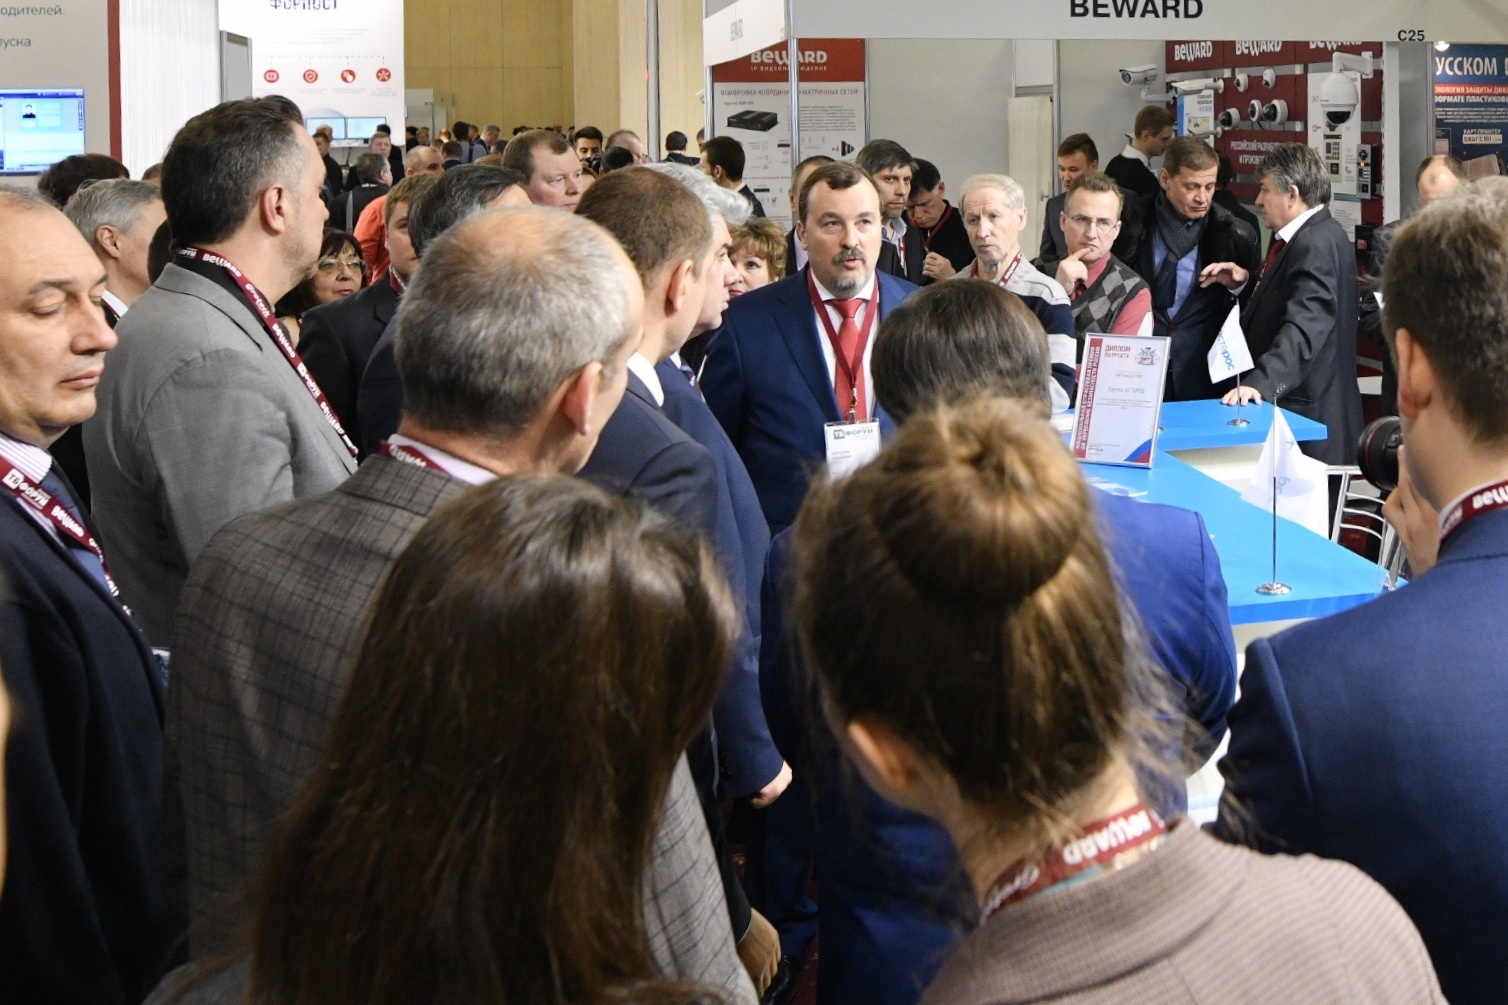 TB Forum 2018: new quality of exposition, powerful conference program, C-level professional audience and pre-arranged meetings with buyers